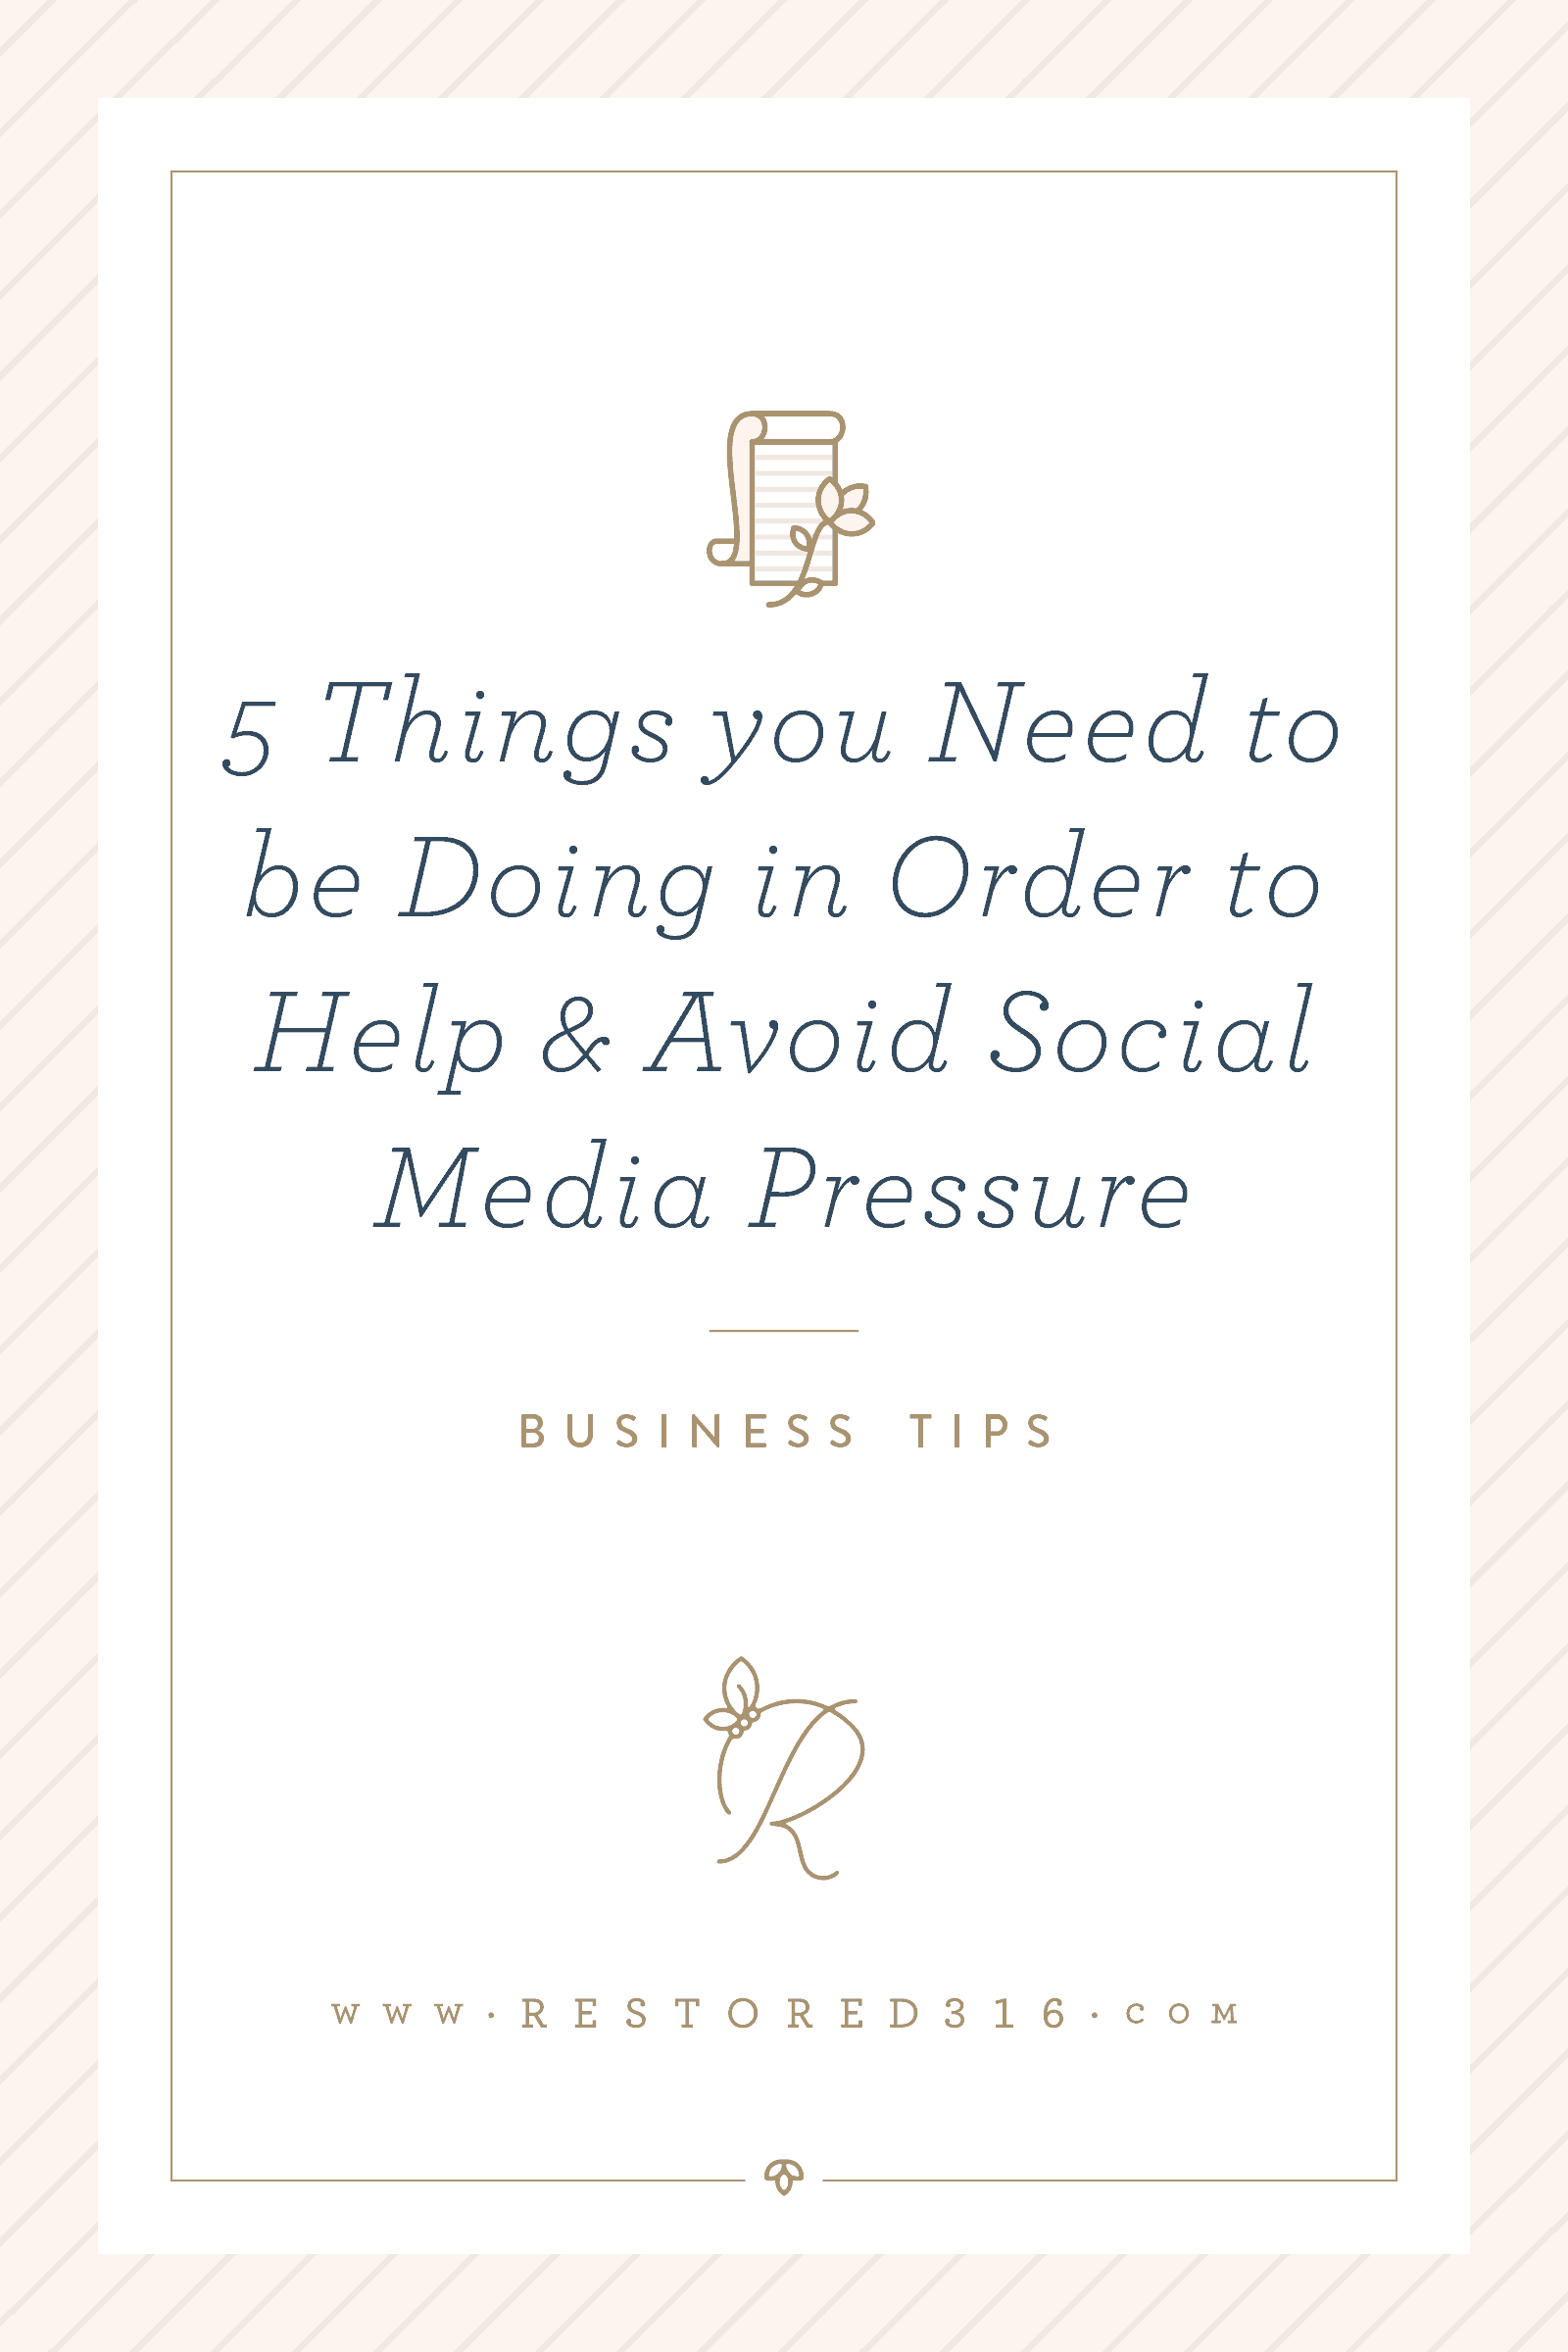 5 Things you Need to be Doing in Order to Help & Avoid Social Media Pressure.png